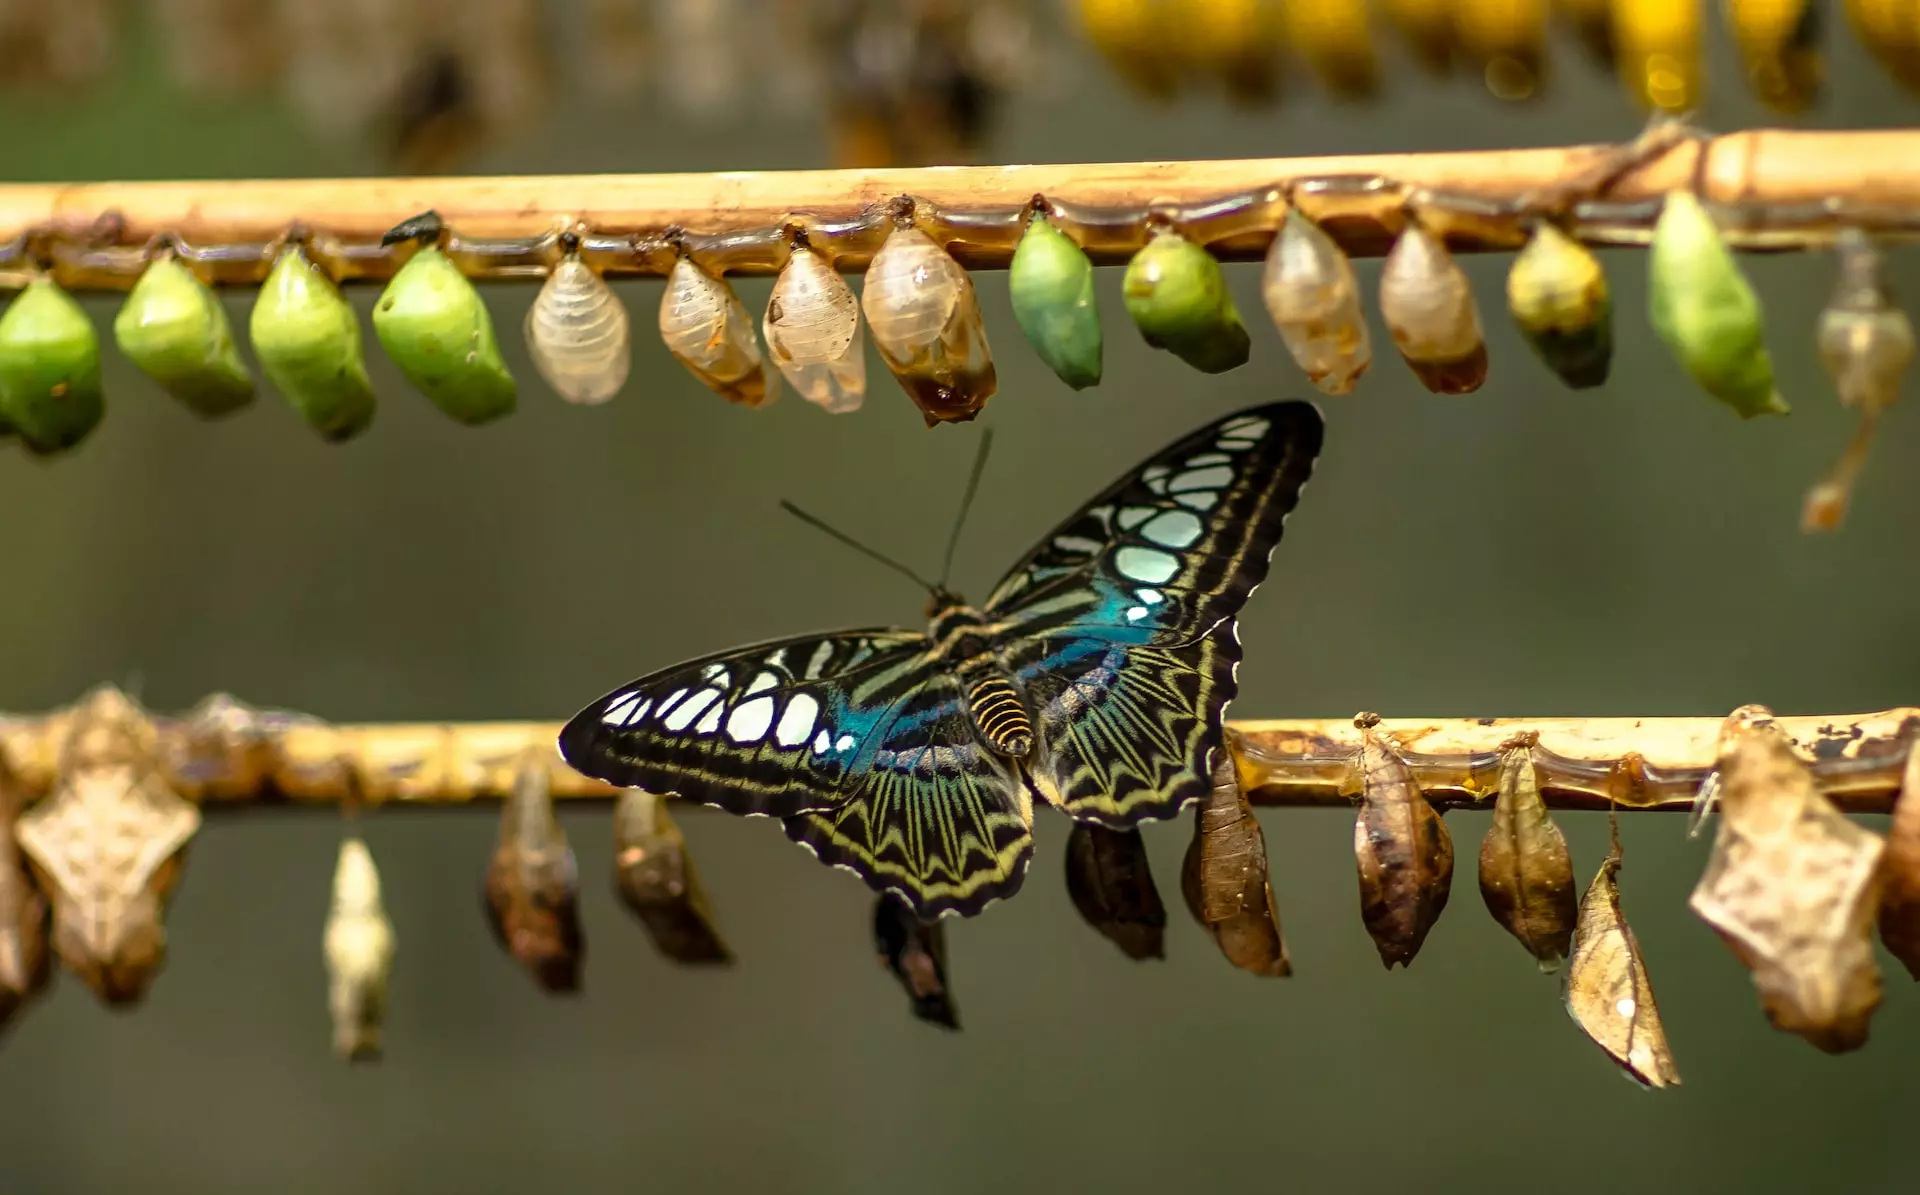 A butterfly resting on a frame containing multiple occupied and former chrysalises